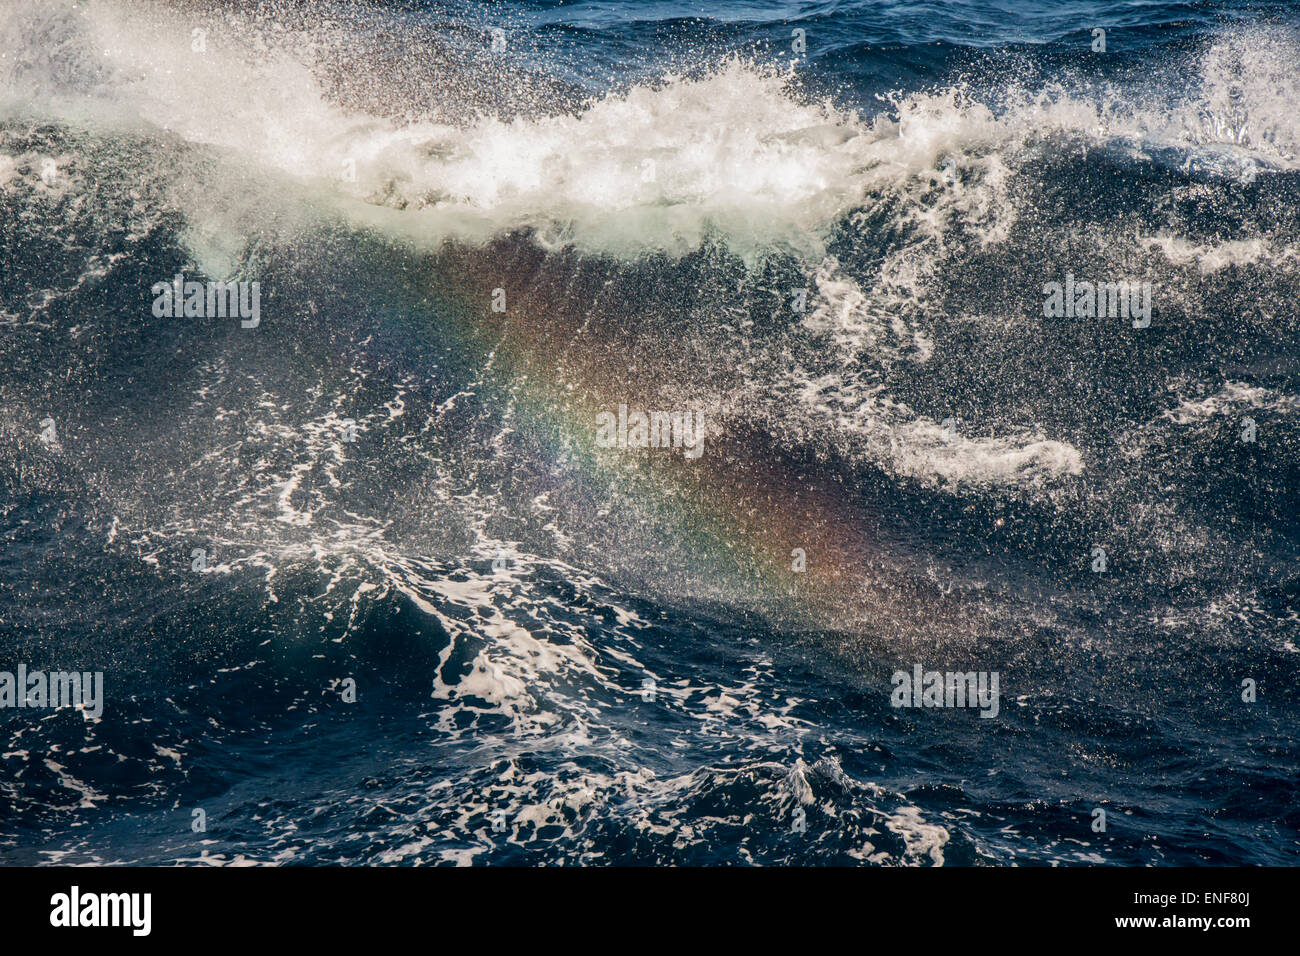 Splashes of sea water with rainbow occurrence. Stock Photo